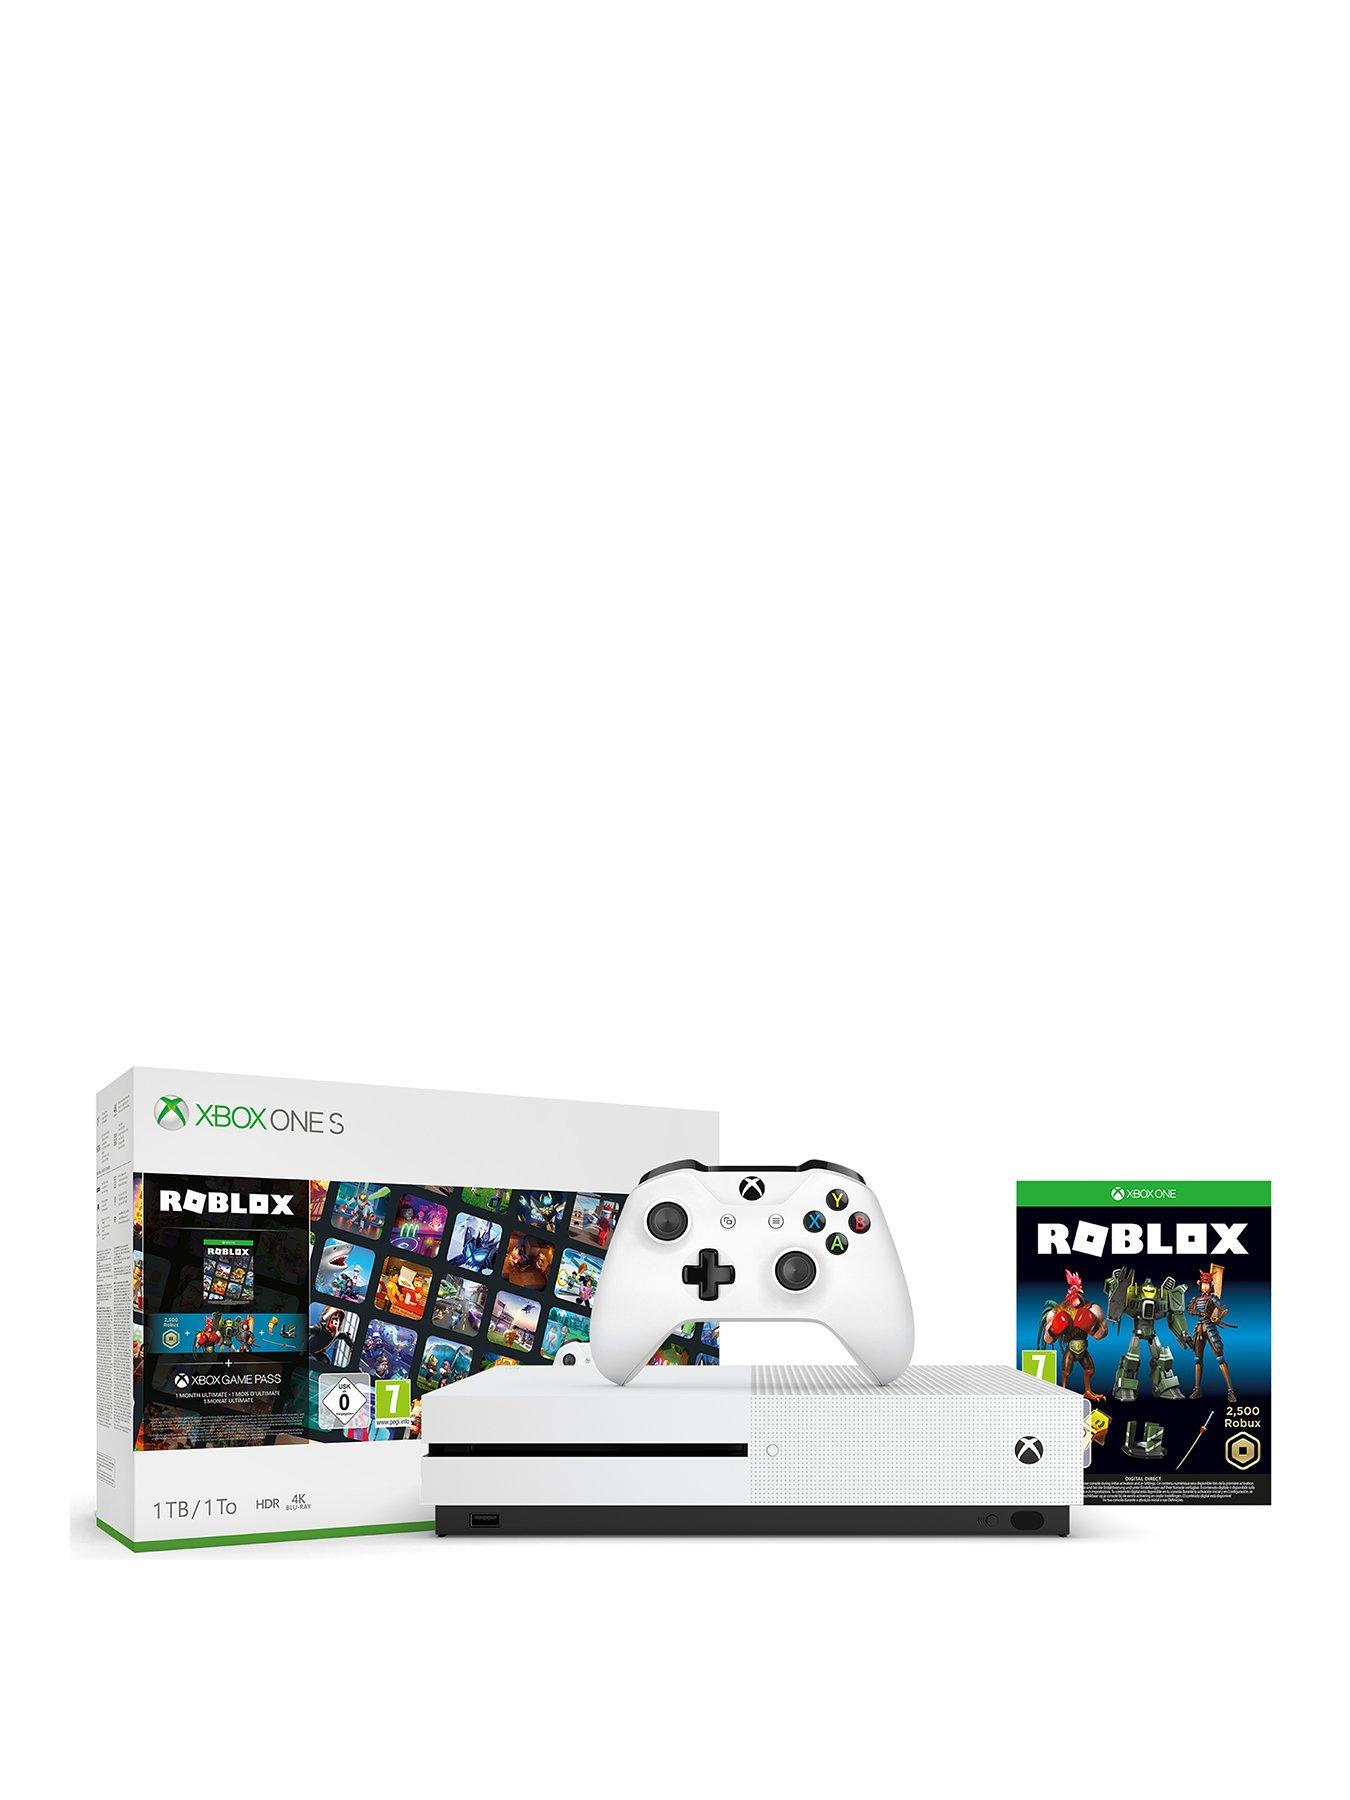 Xbox One S With Roblox Bundle And Optional Extras 1tb Console White Very Co Uk - how does tarabyte have it if it has 0 sales roblox